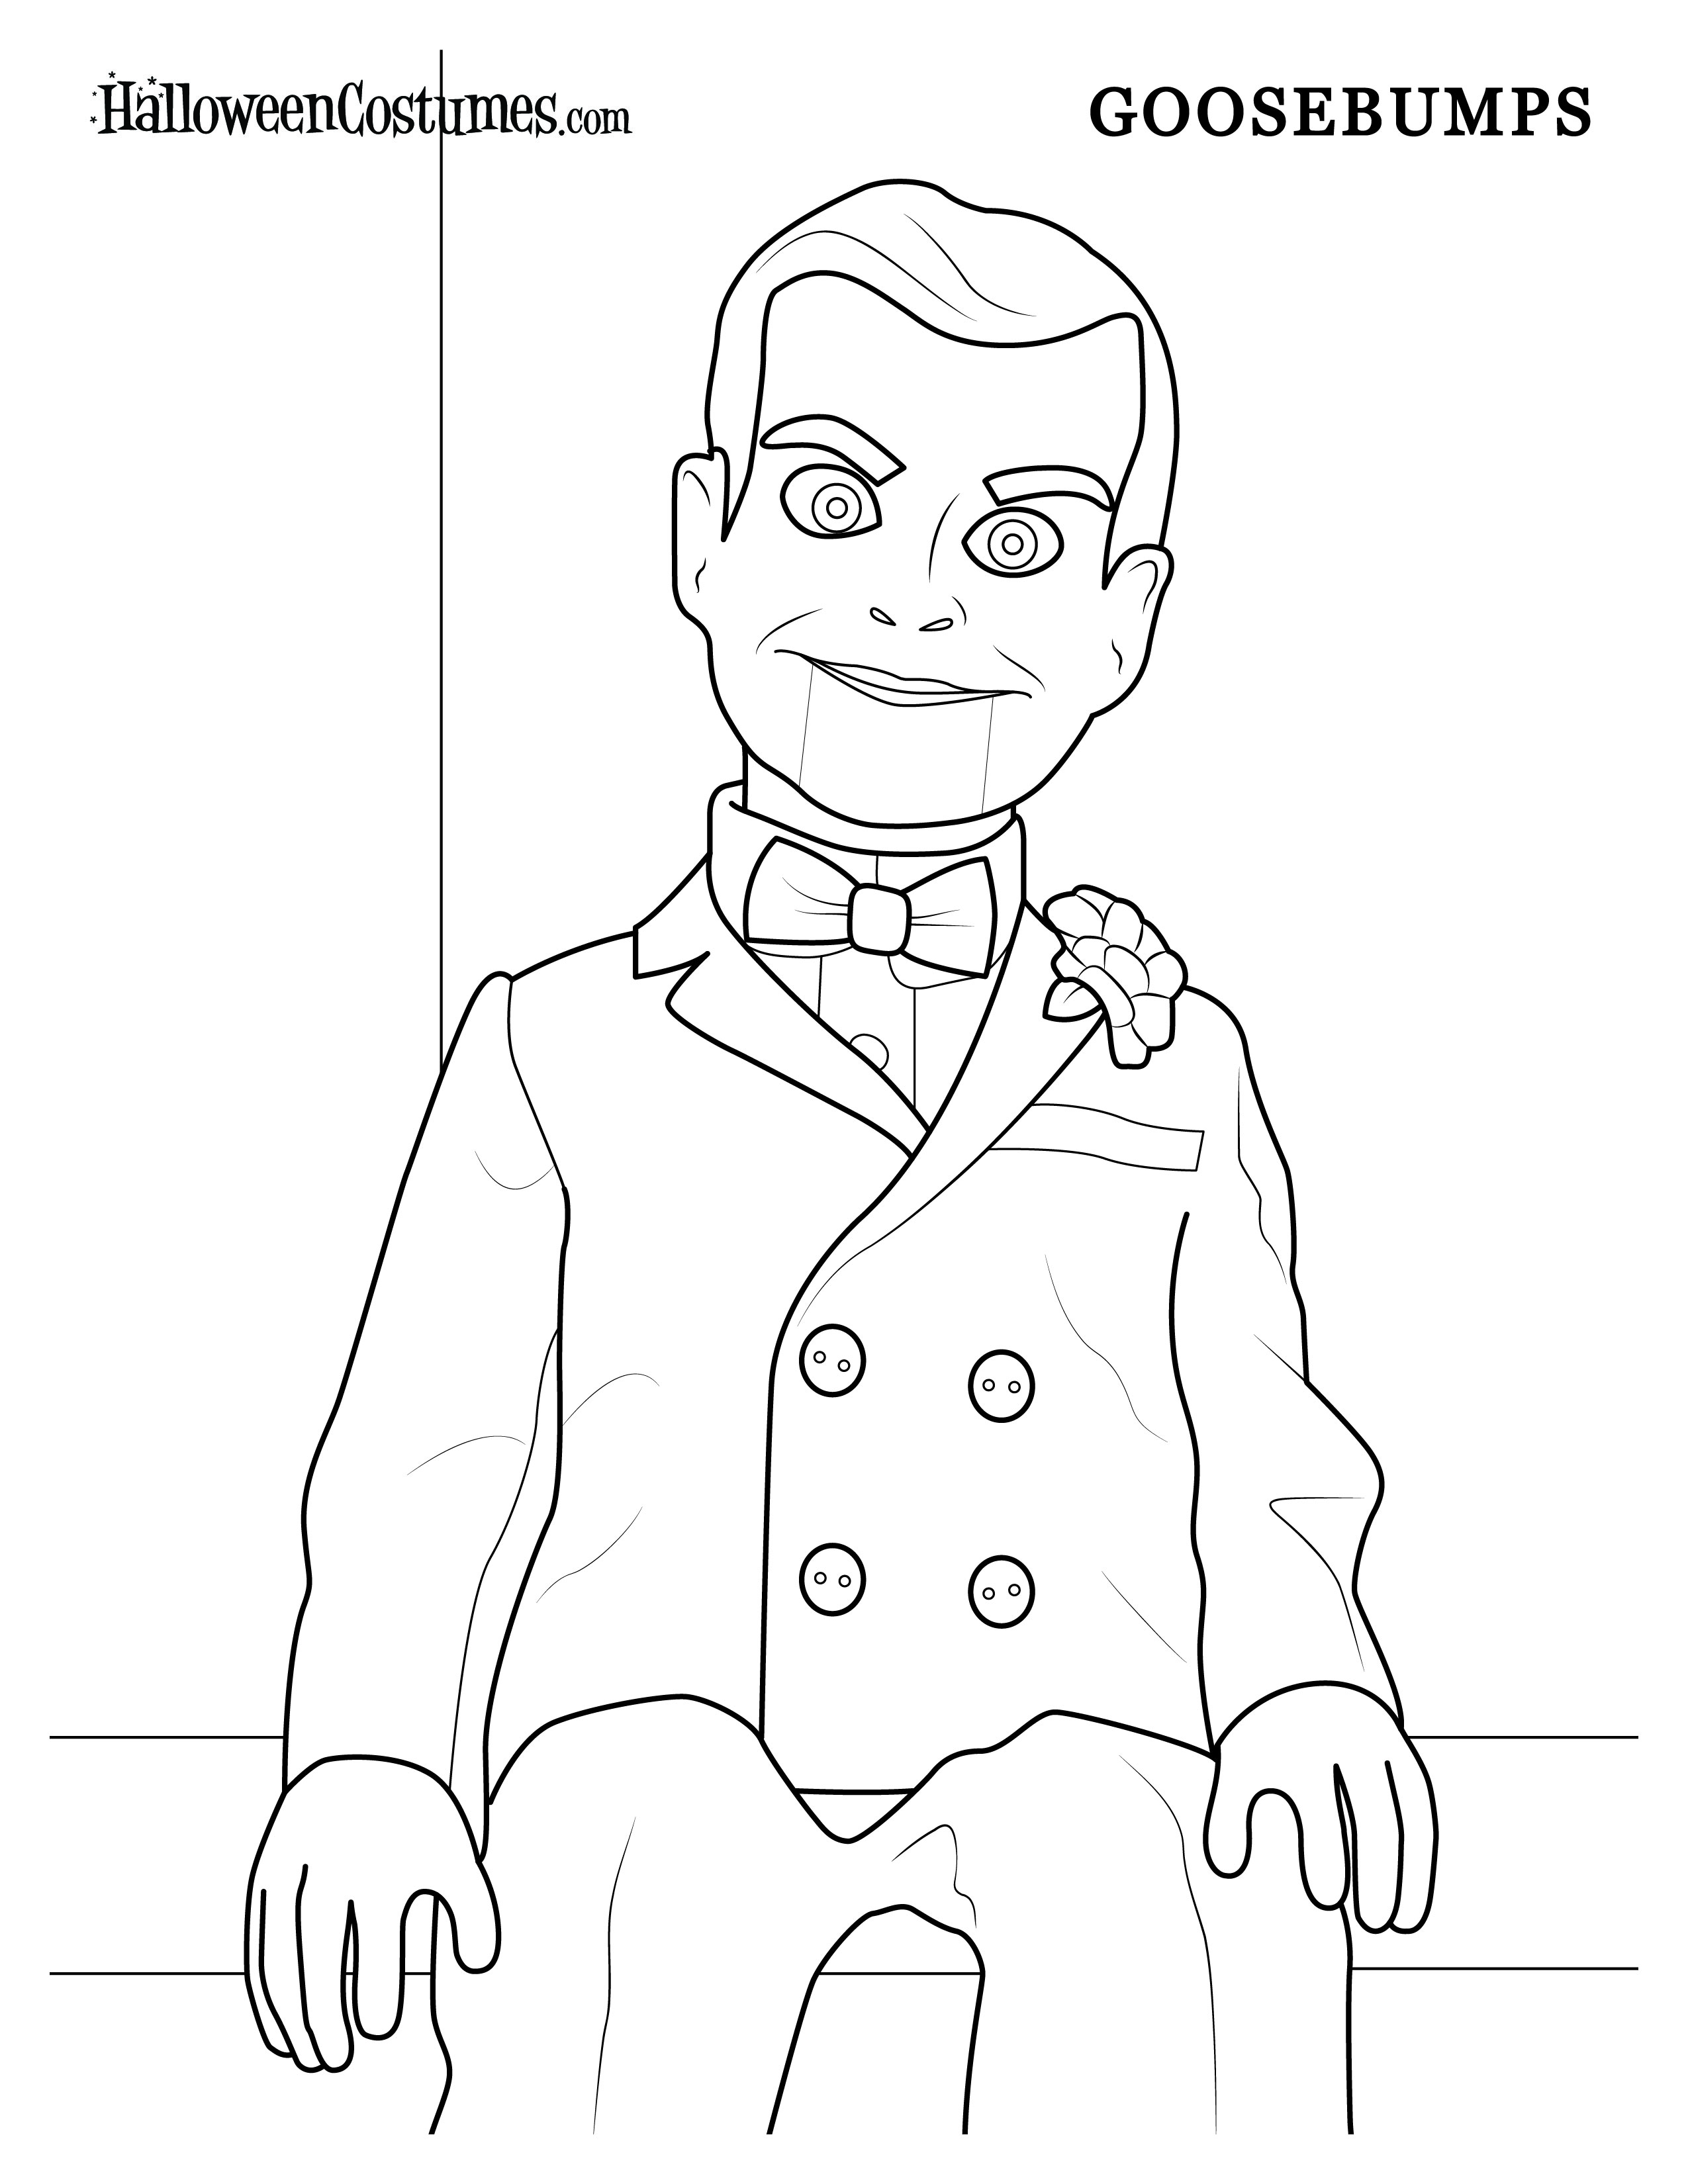 Coloring Pages Goosebumps Slappy Printable Sheets Goosbumps Dummy Movie